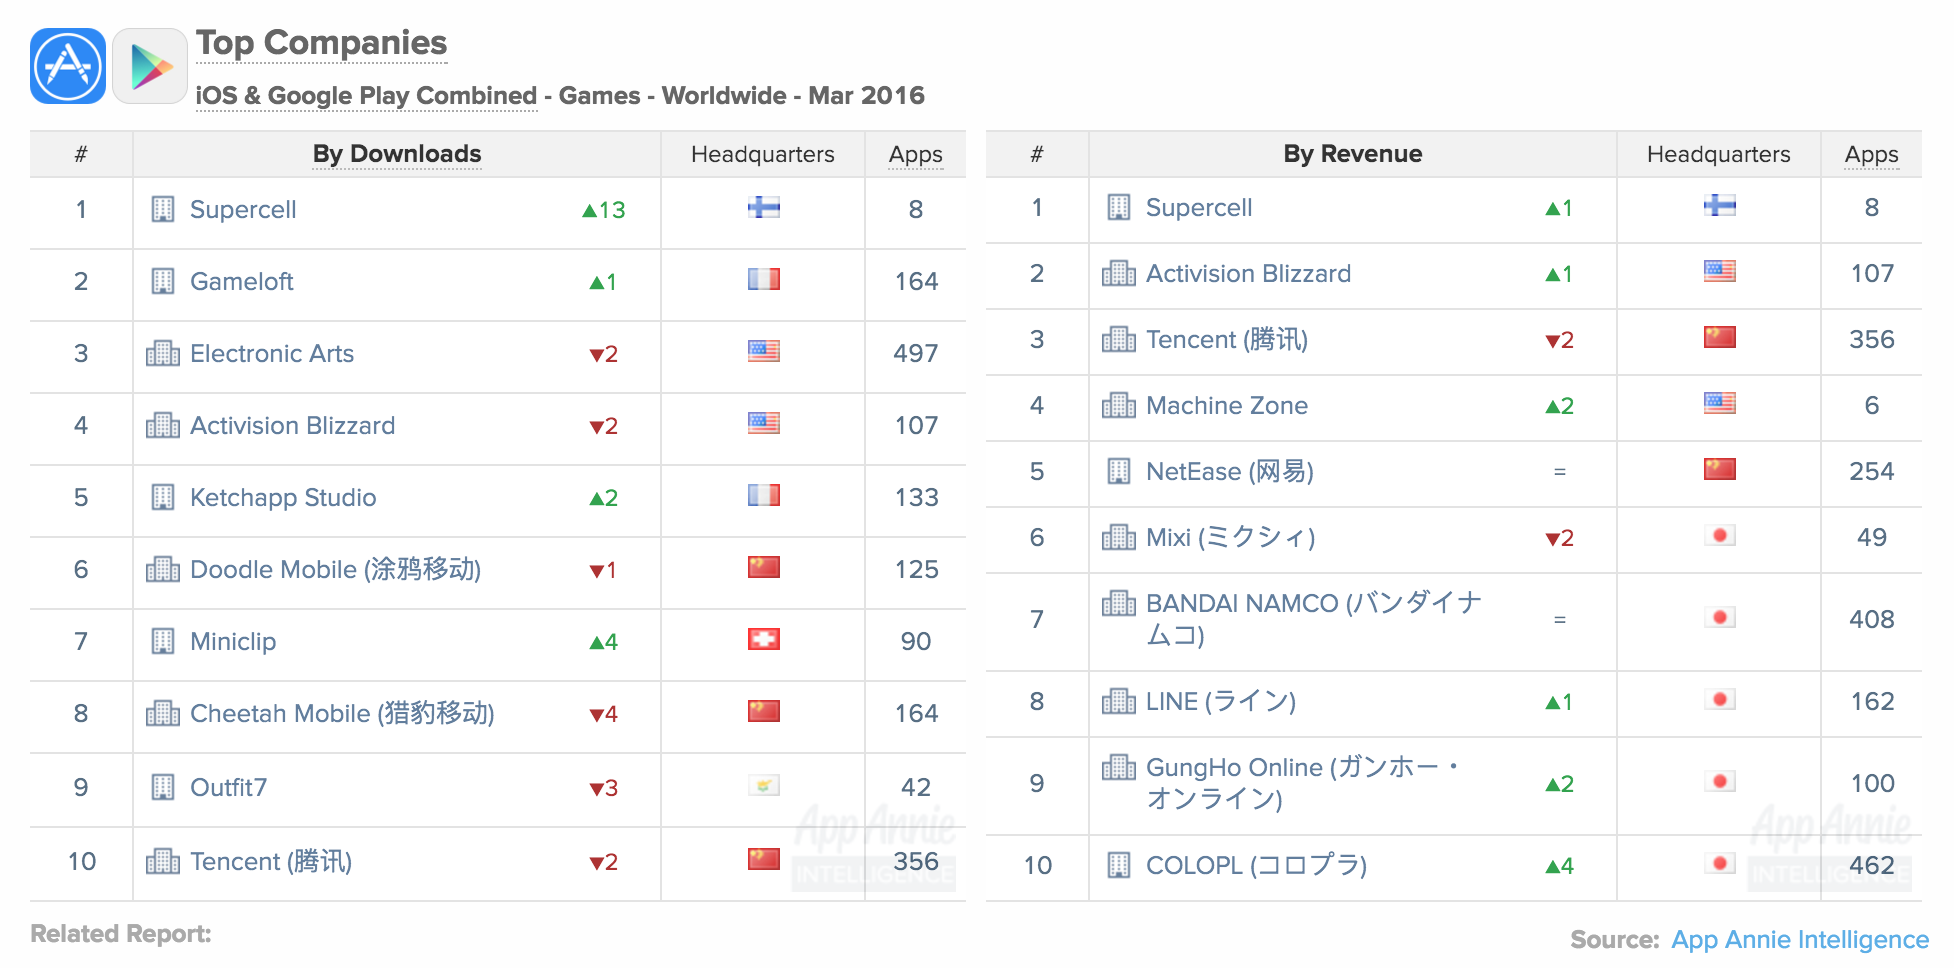 Top Companies iOs GP Combined Games Worldwide March 2016